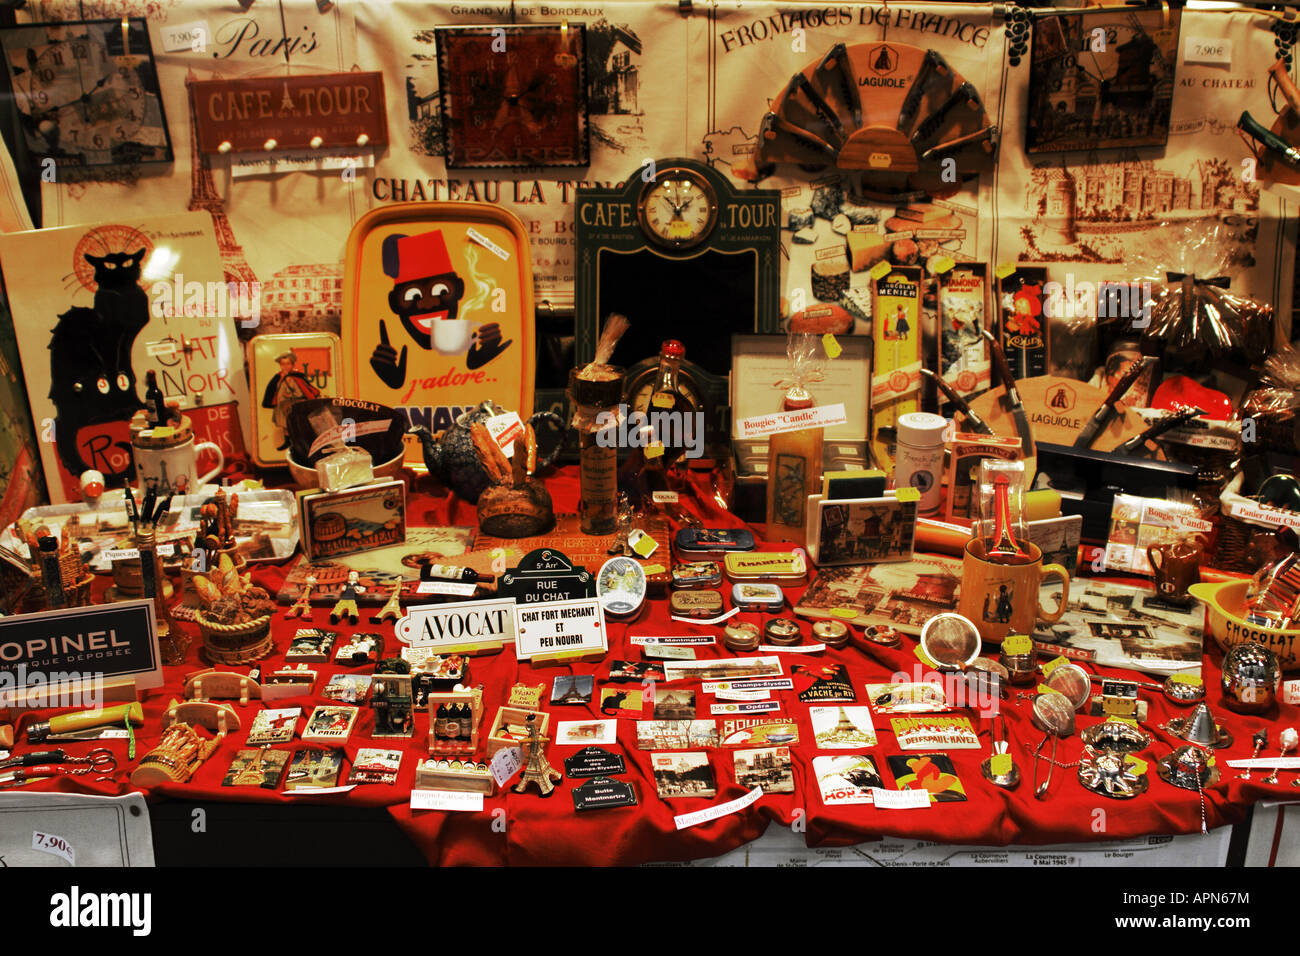 A shop window display of bric a brac and antique items in the Montmartre district of Paris France Stock Photo